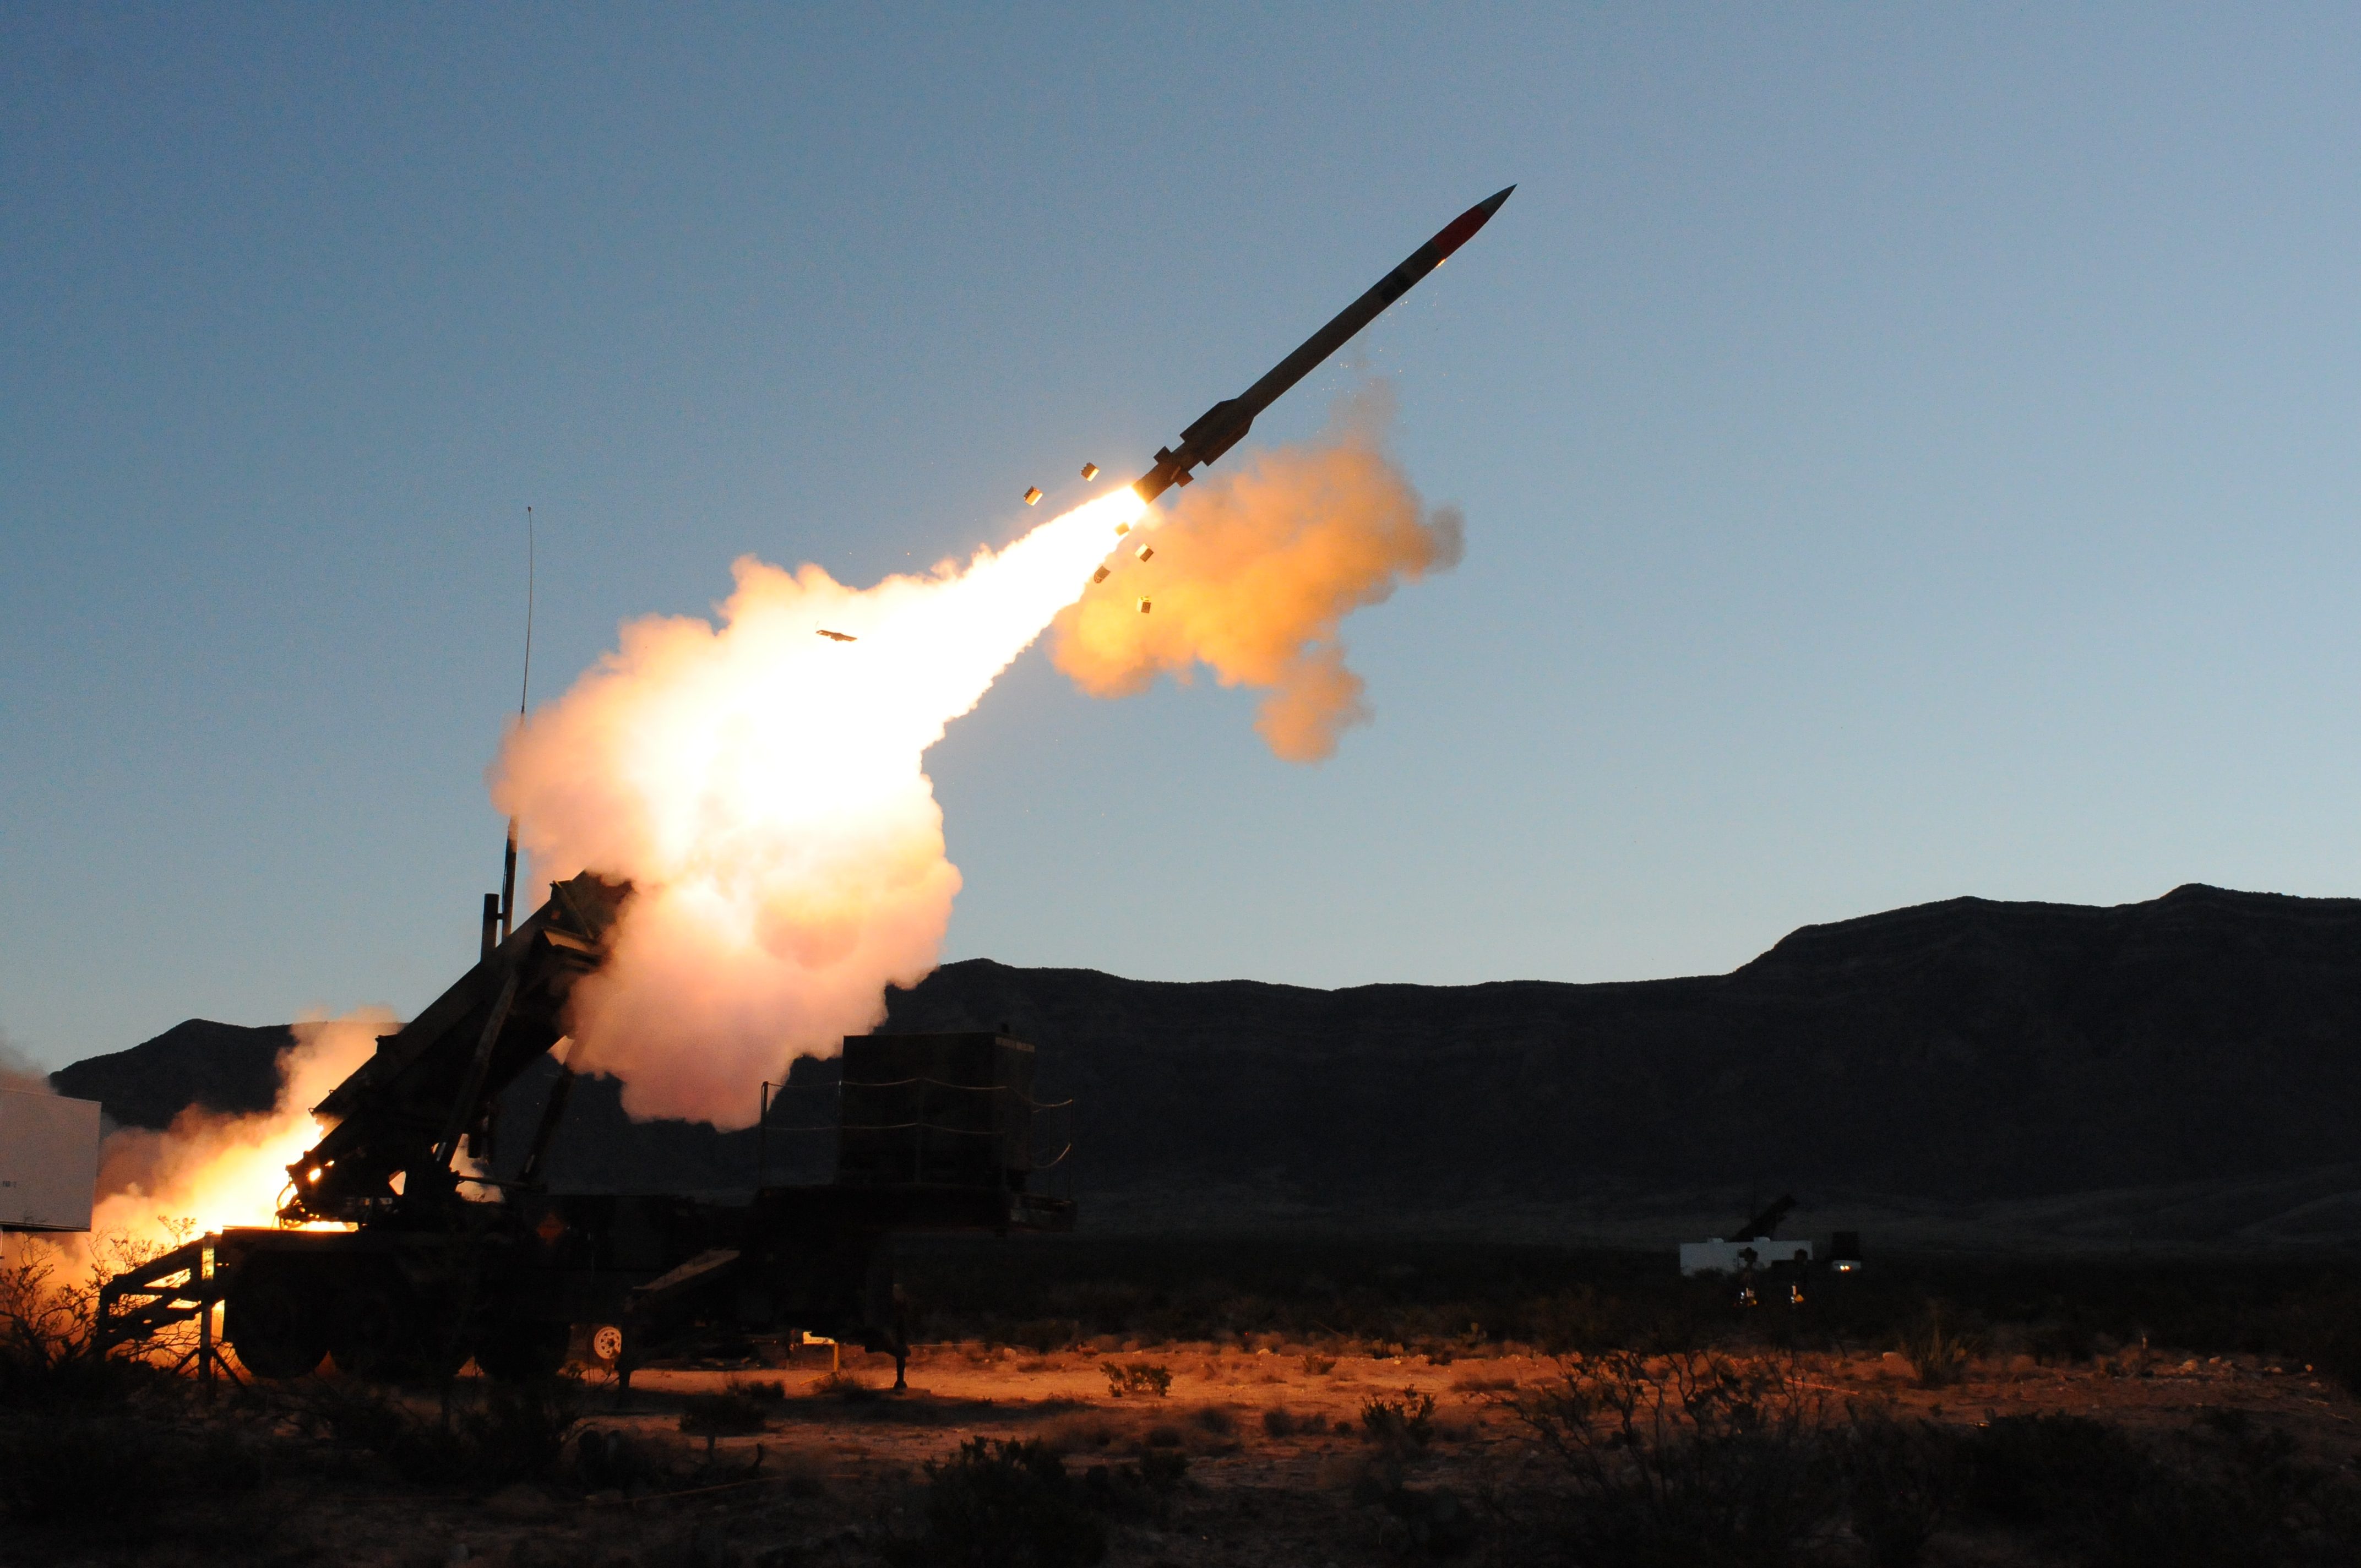 Lockheed Martin awarded $506.9M contract for Patriot Advanced Capability-3 missiles